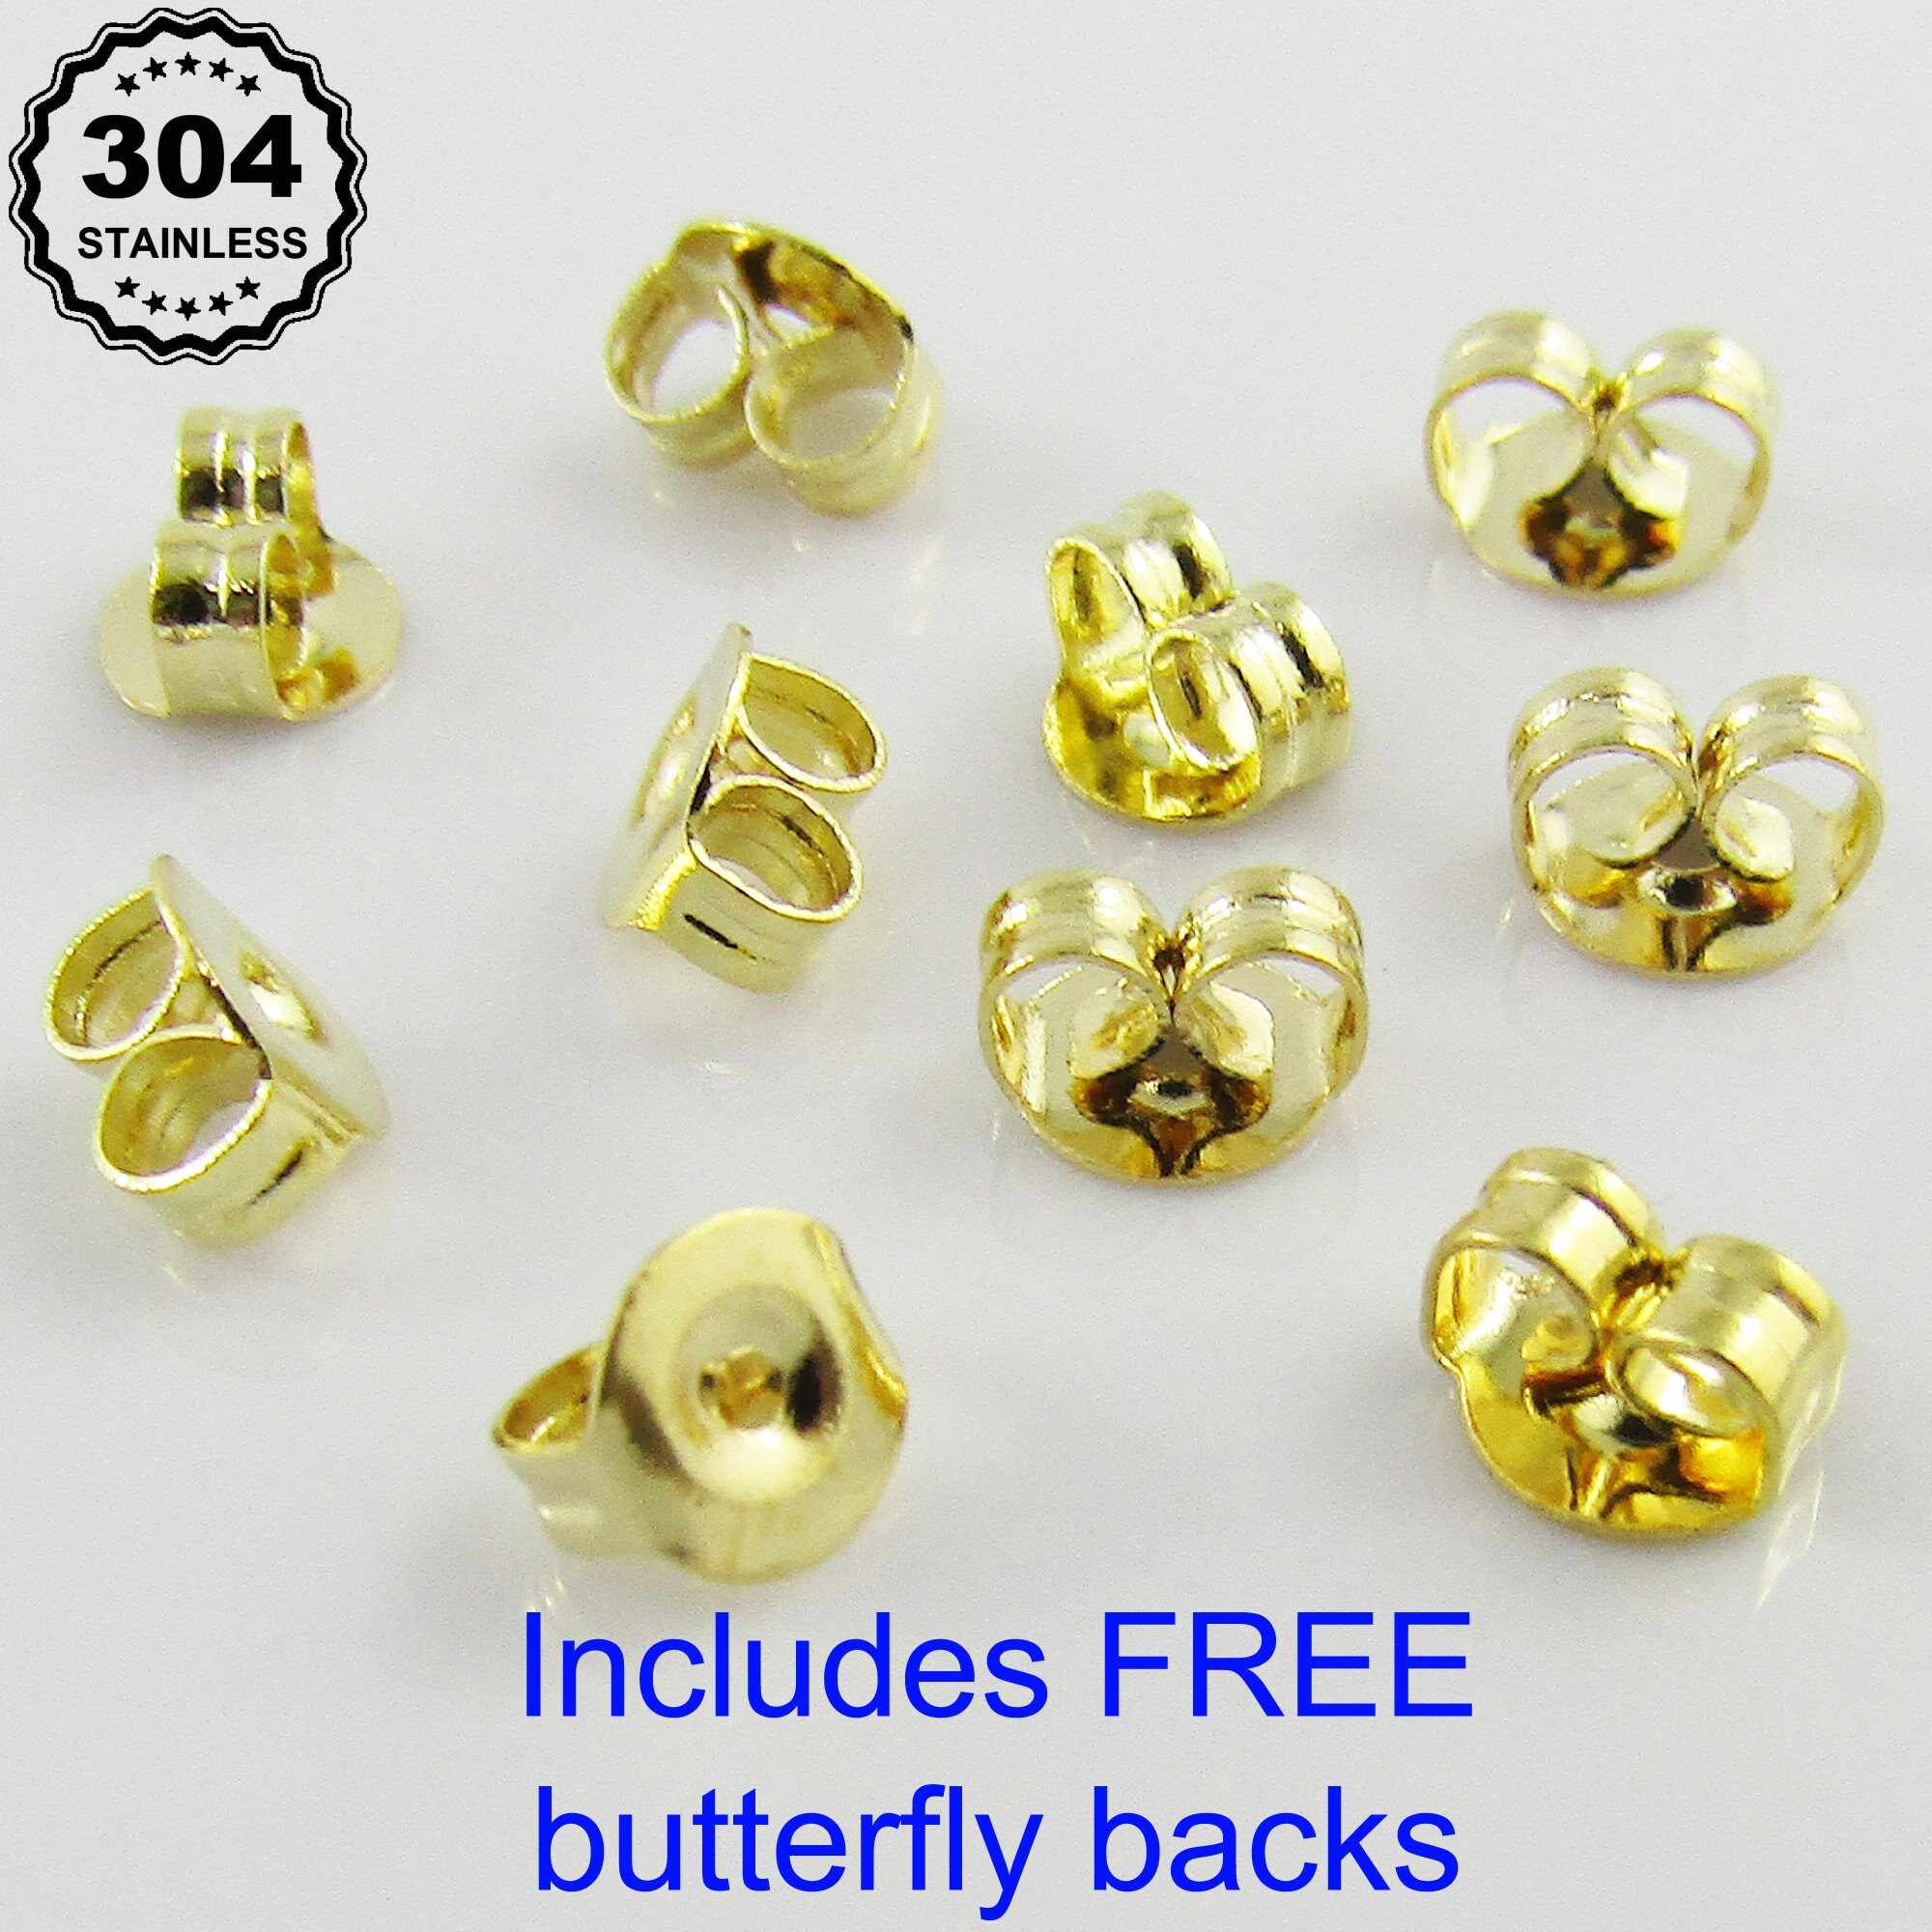 Bulk 360 pieces of 6x0.7mm Light Gold Jump Rings Open Jumprings Findings